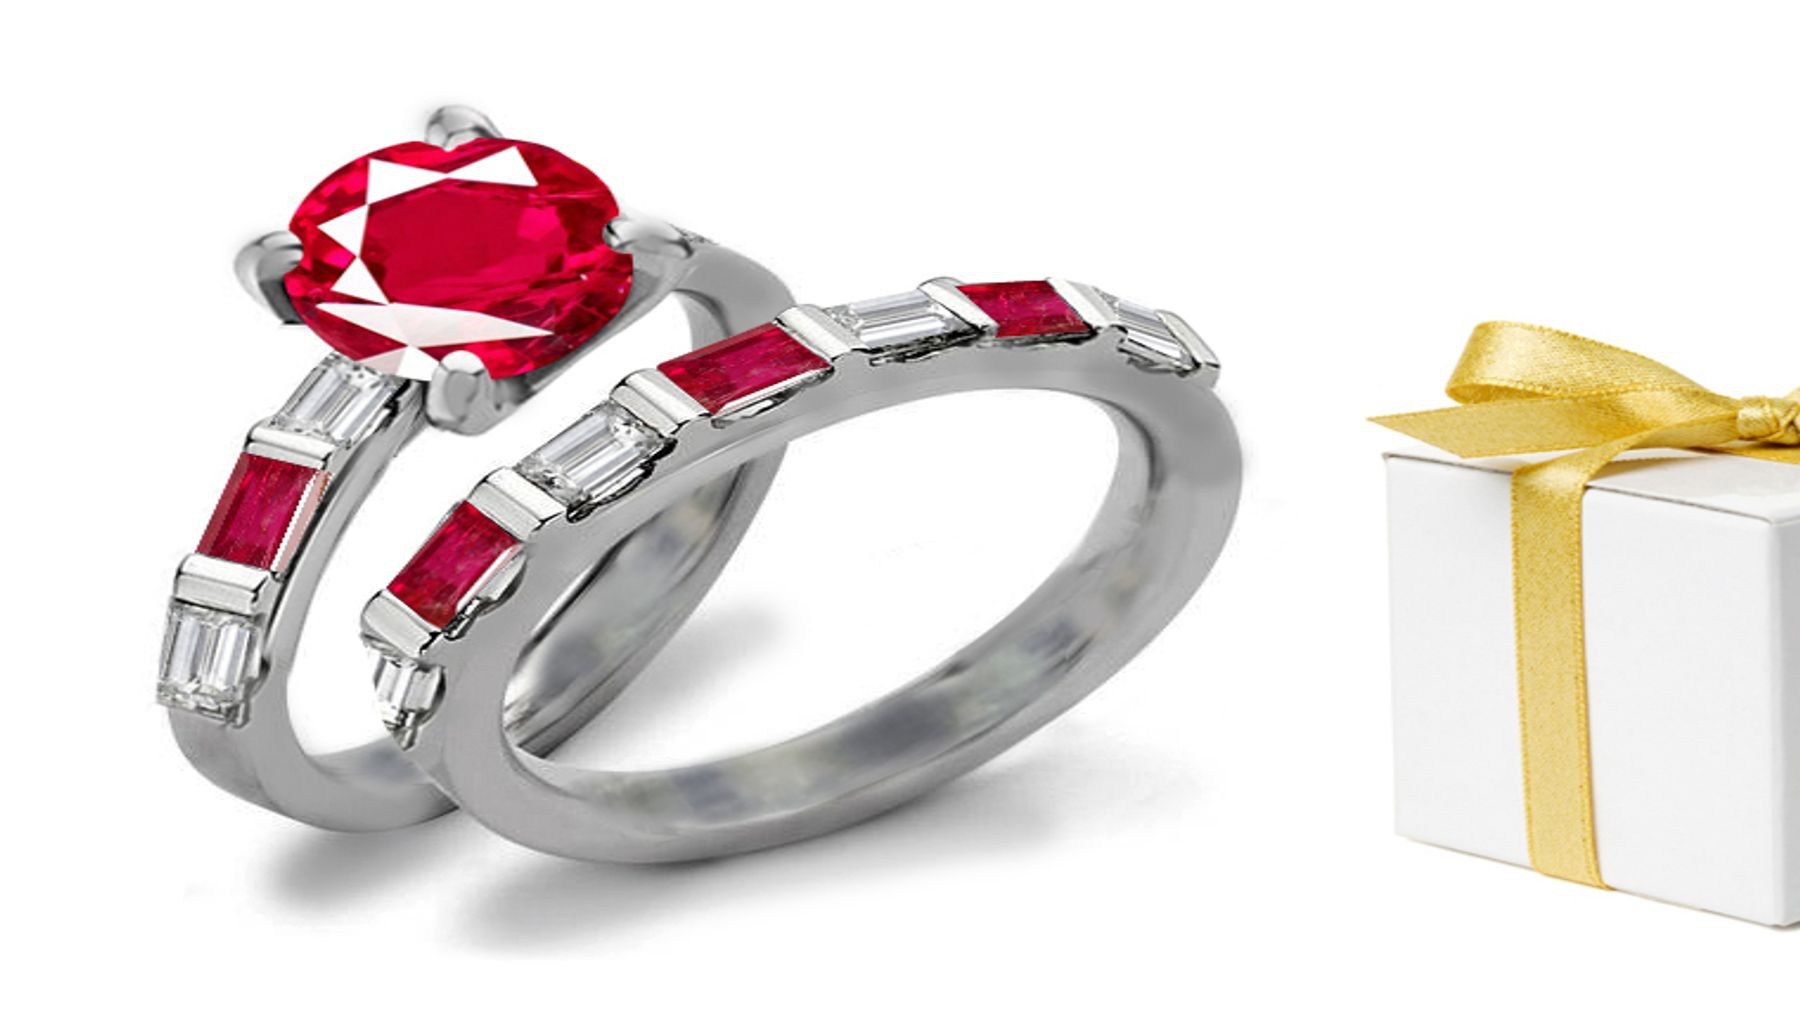 Glamour & Luxury: Natural Beauty Shared Bar Set Ruby & Rectangle Cut Diamond Gold Accent Ring Plus Diamond King of Gems Ruby Gold Band